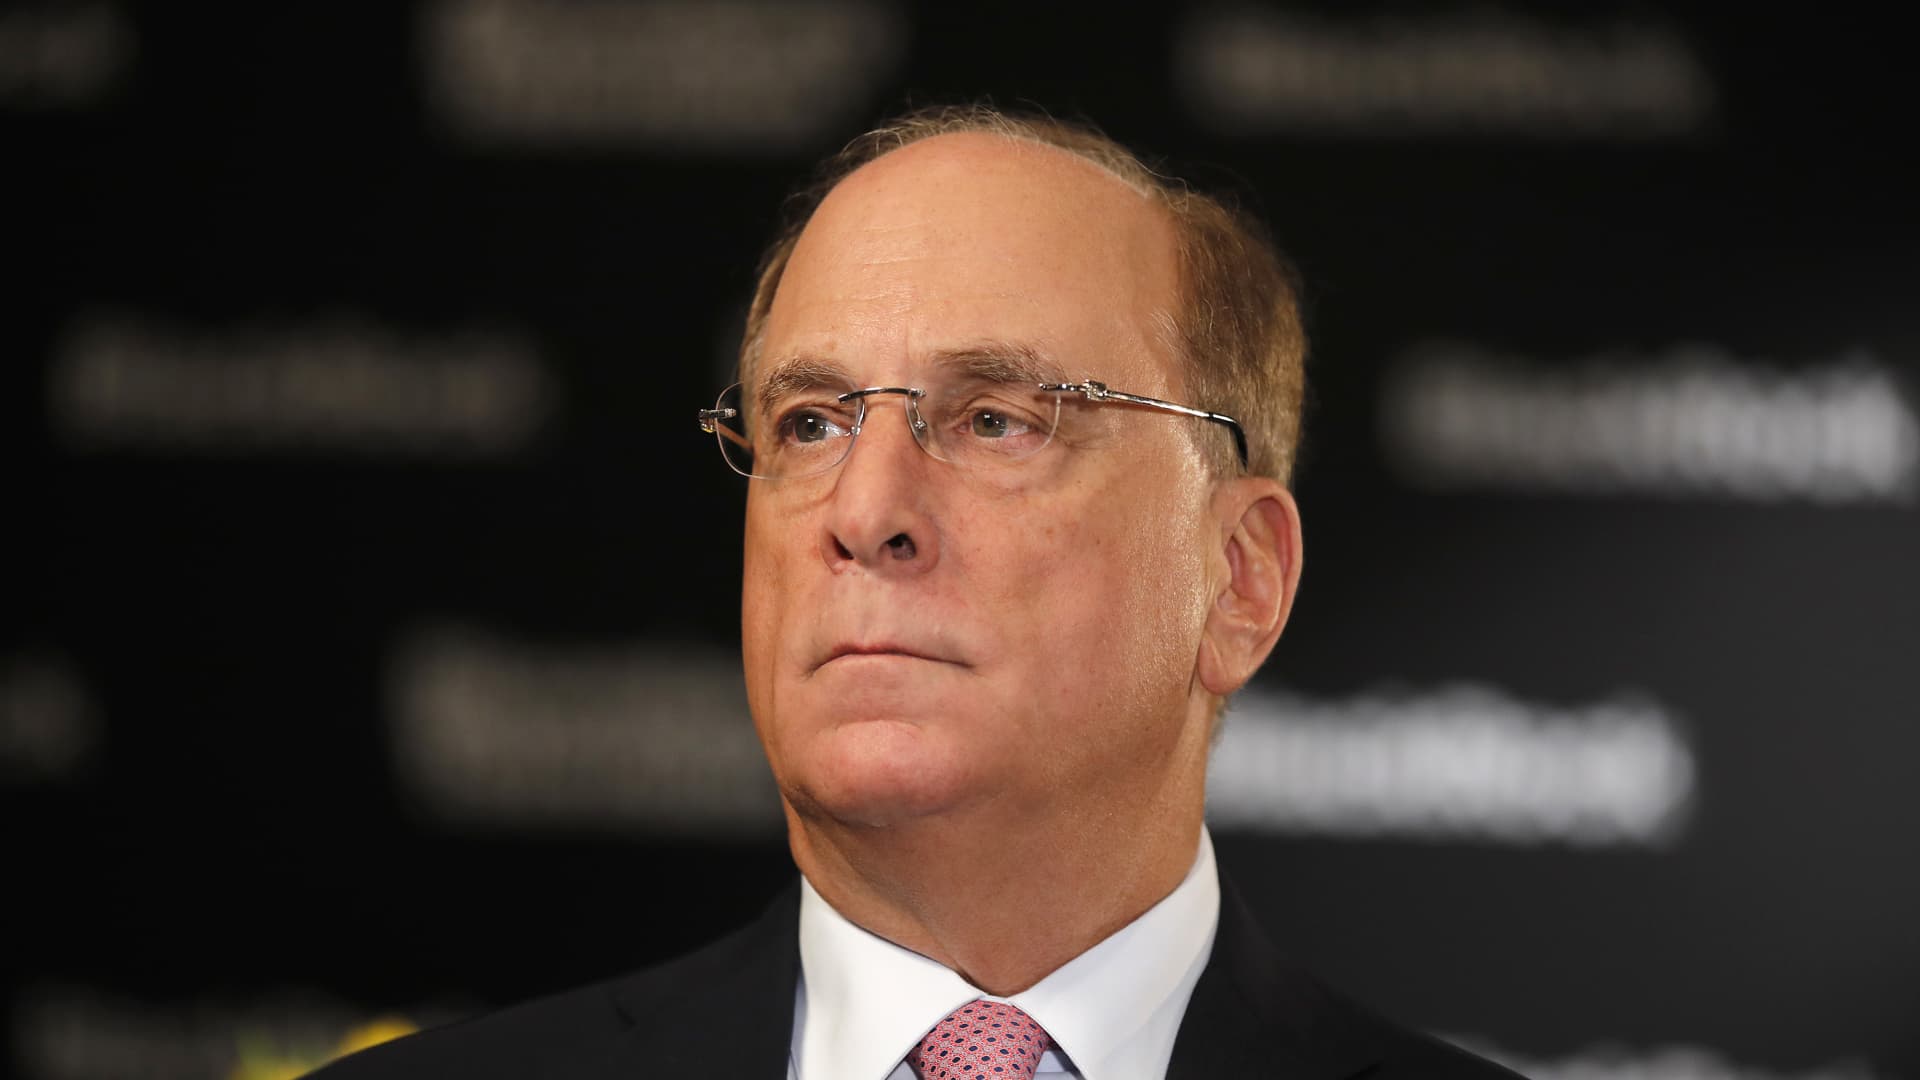 Larry Fink, chief executive officer of BlackRock Inc., in Zurich, Switzerland, on Thursday, March 7, 2019.